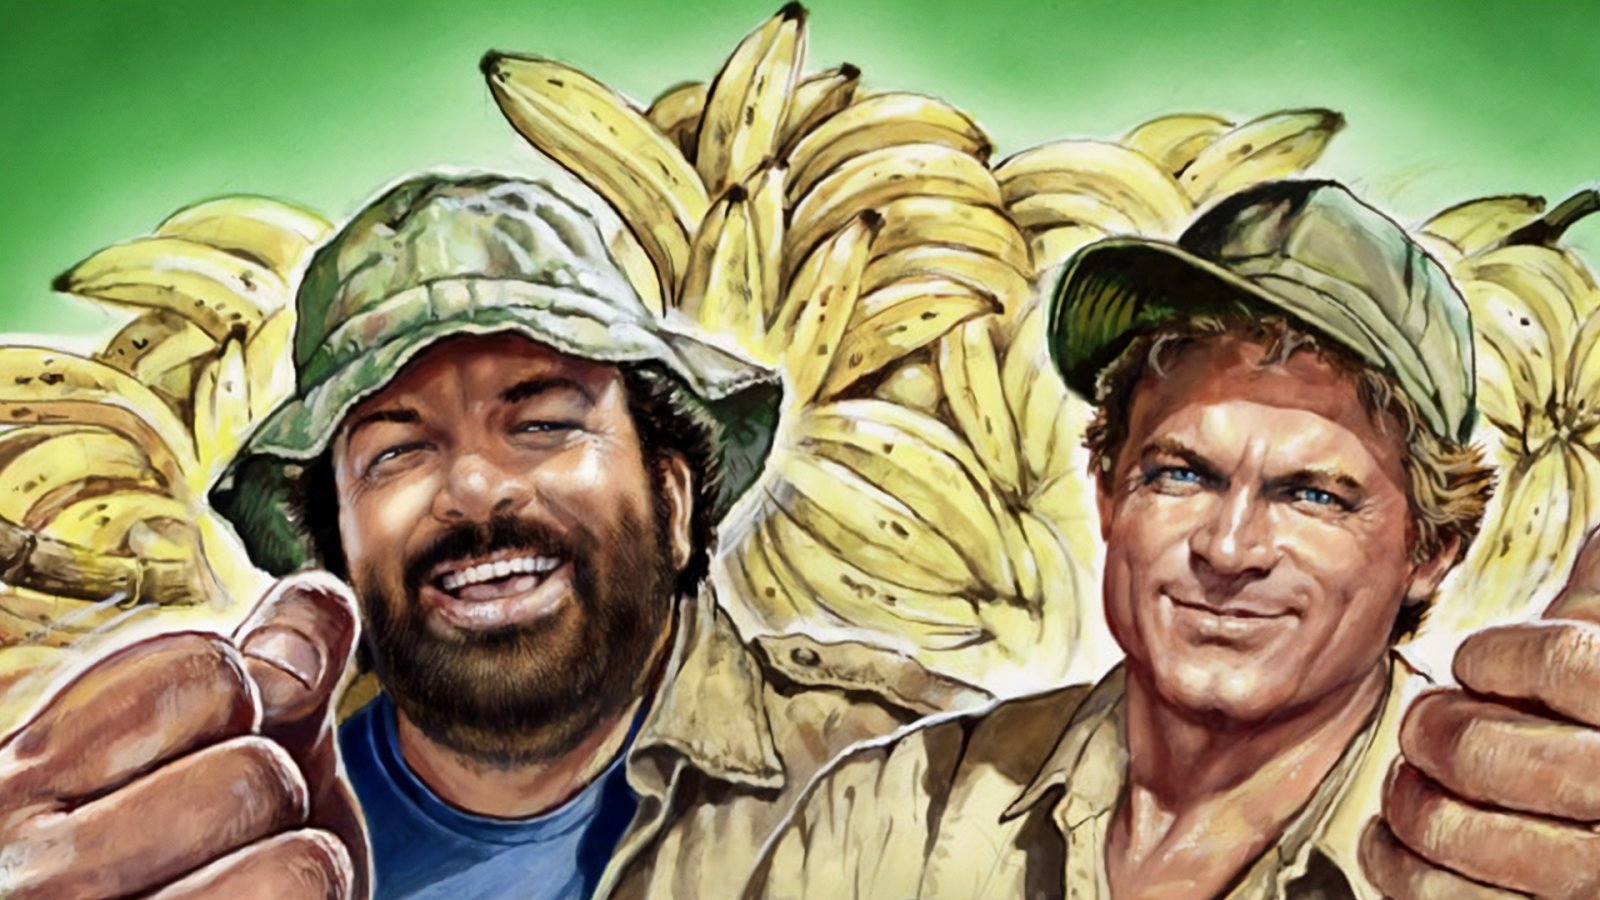 Bud Spencer & Terence Hill - Slaps And Beans 2 disponibile per PC, PlayStation, Xbox, e Nintendo Switch